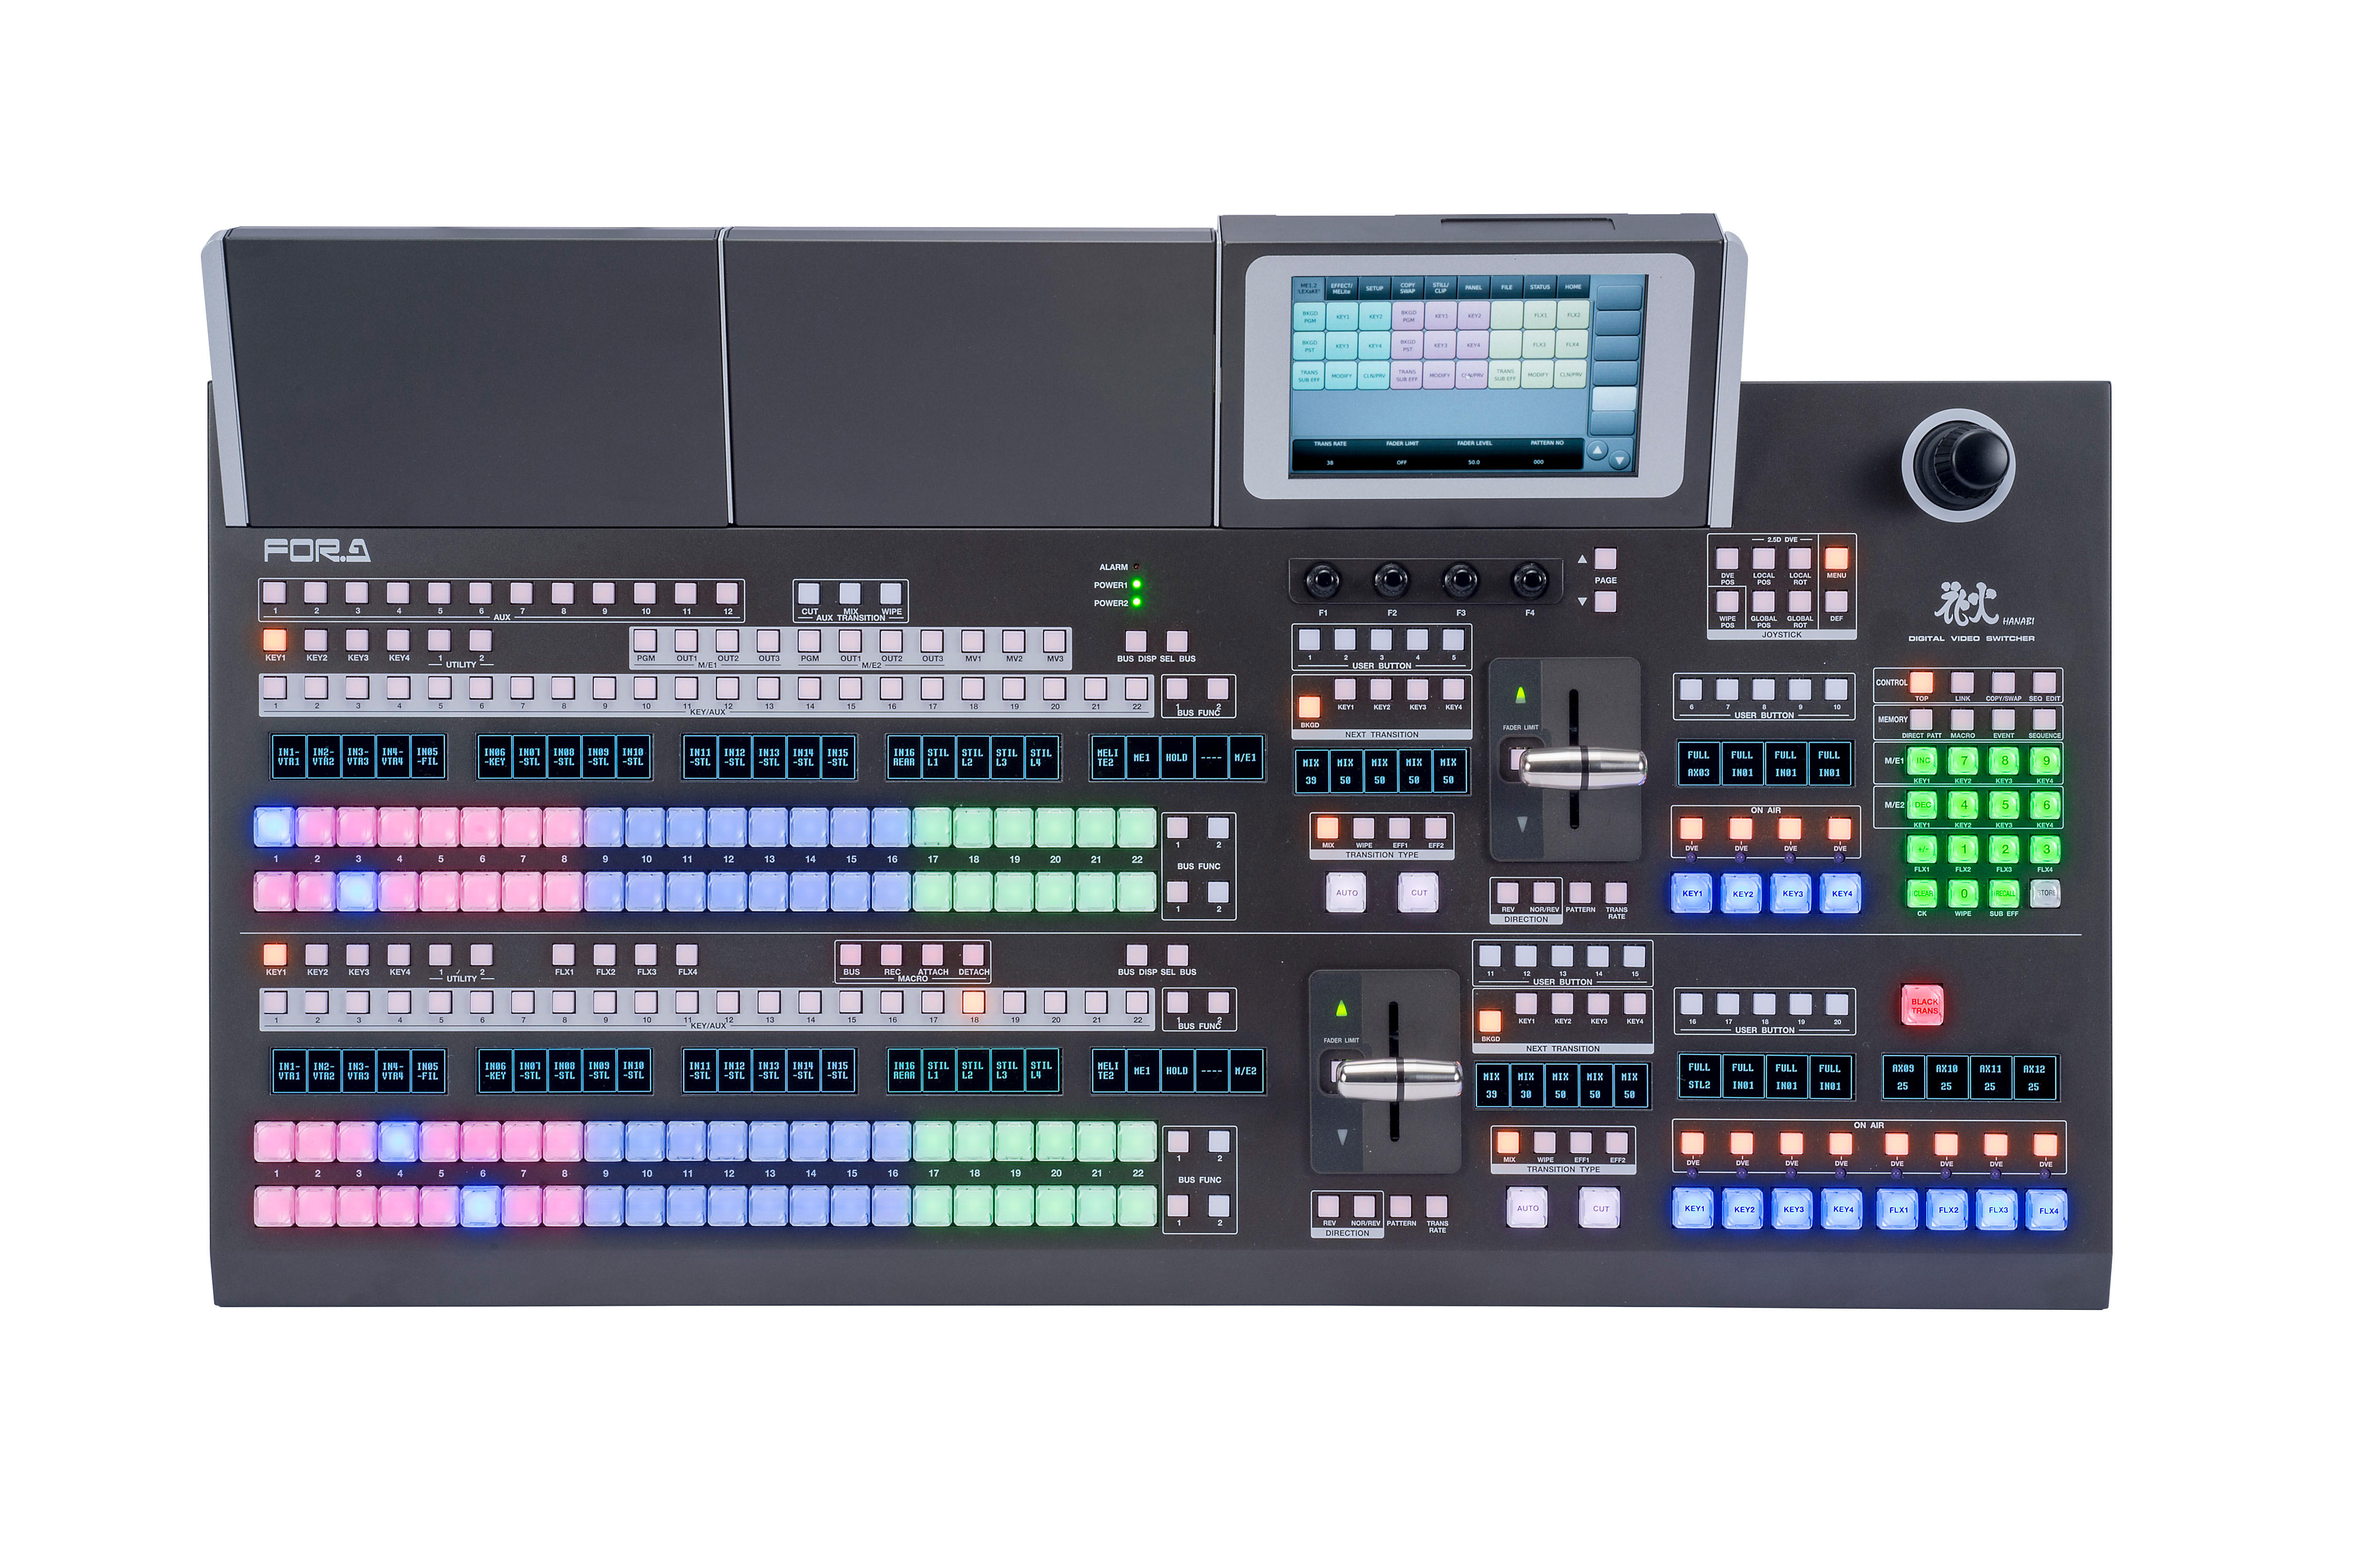 For-A HVS-490 Video Switcher